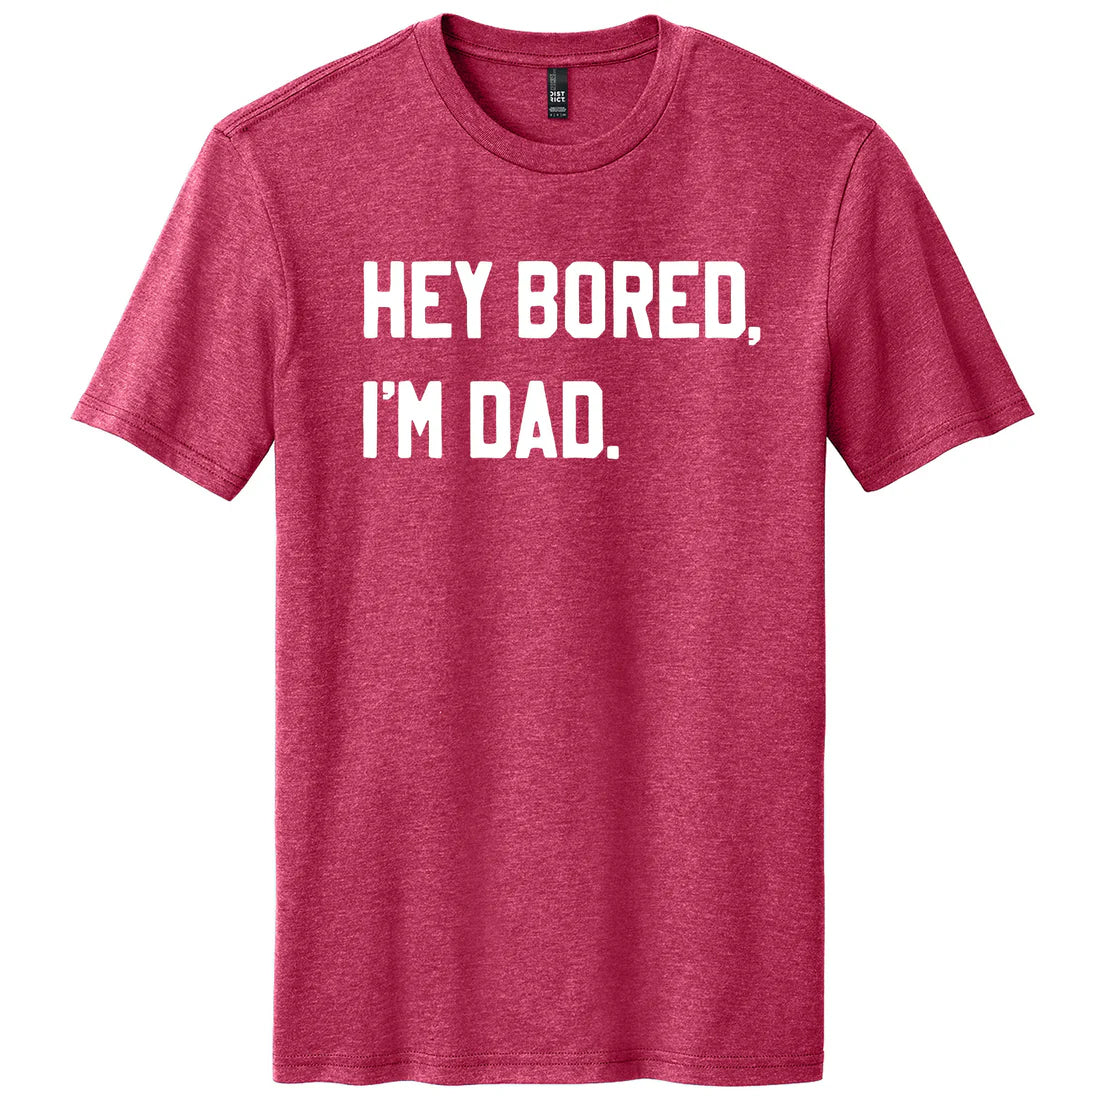 Hey Bored I'm Dad Shirt (Red)